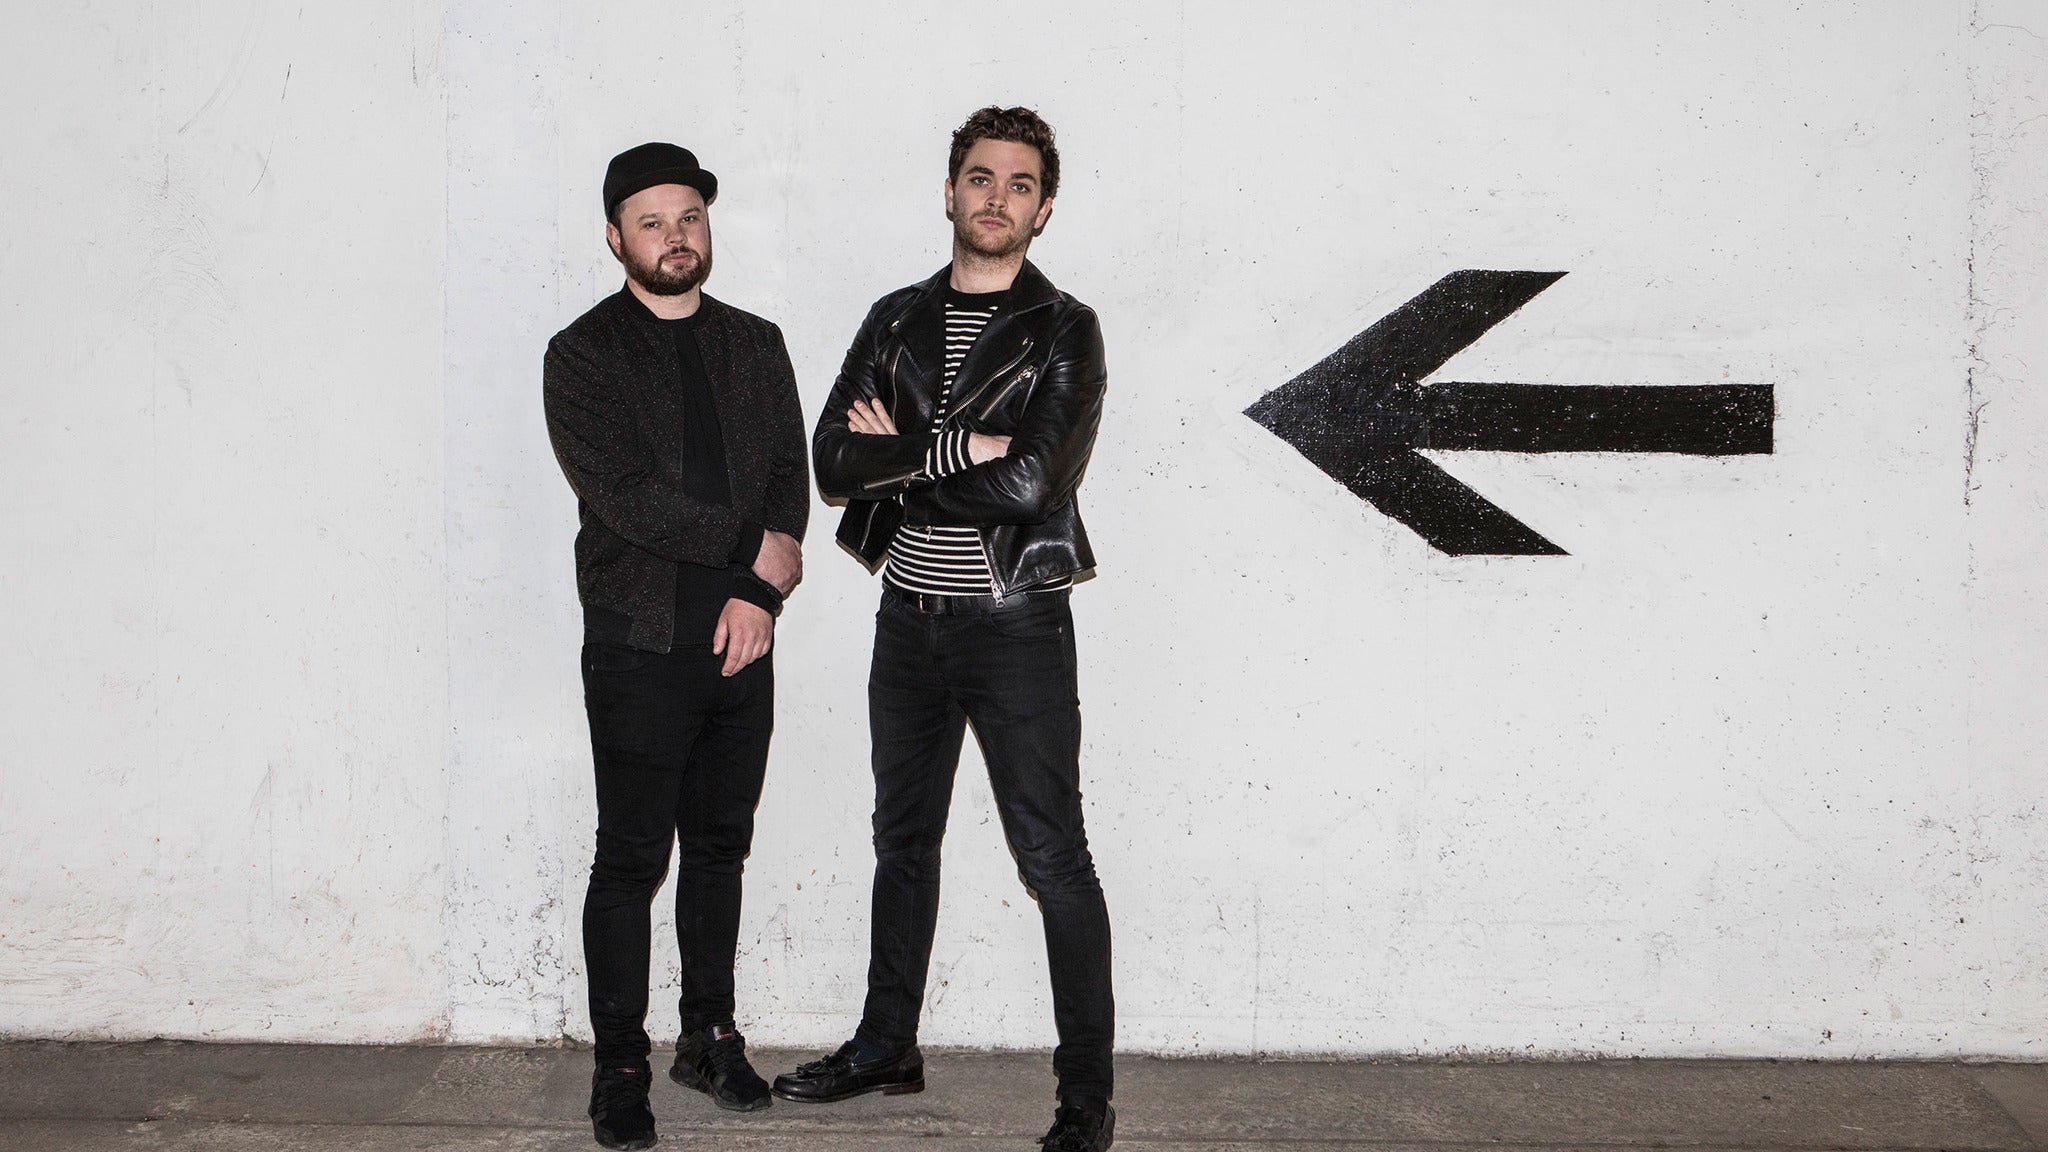 Image used with permission from Ticketmaster | Royal Blood tickets